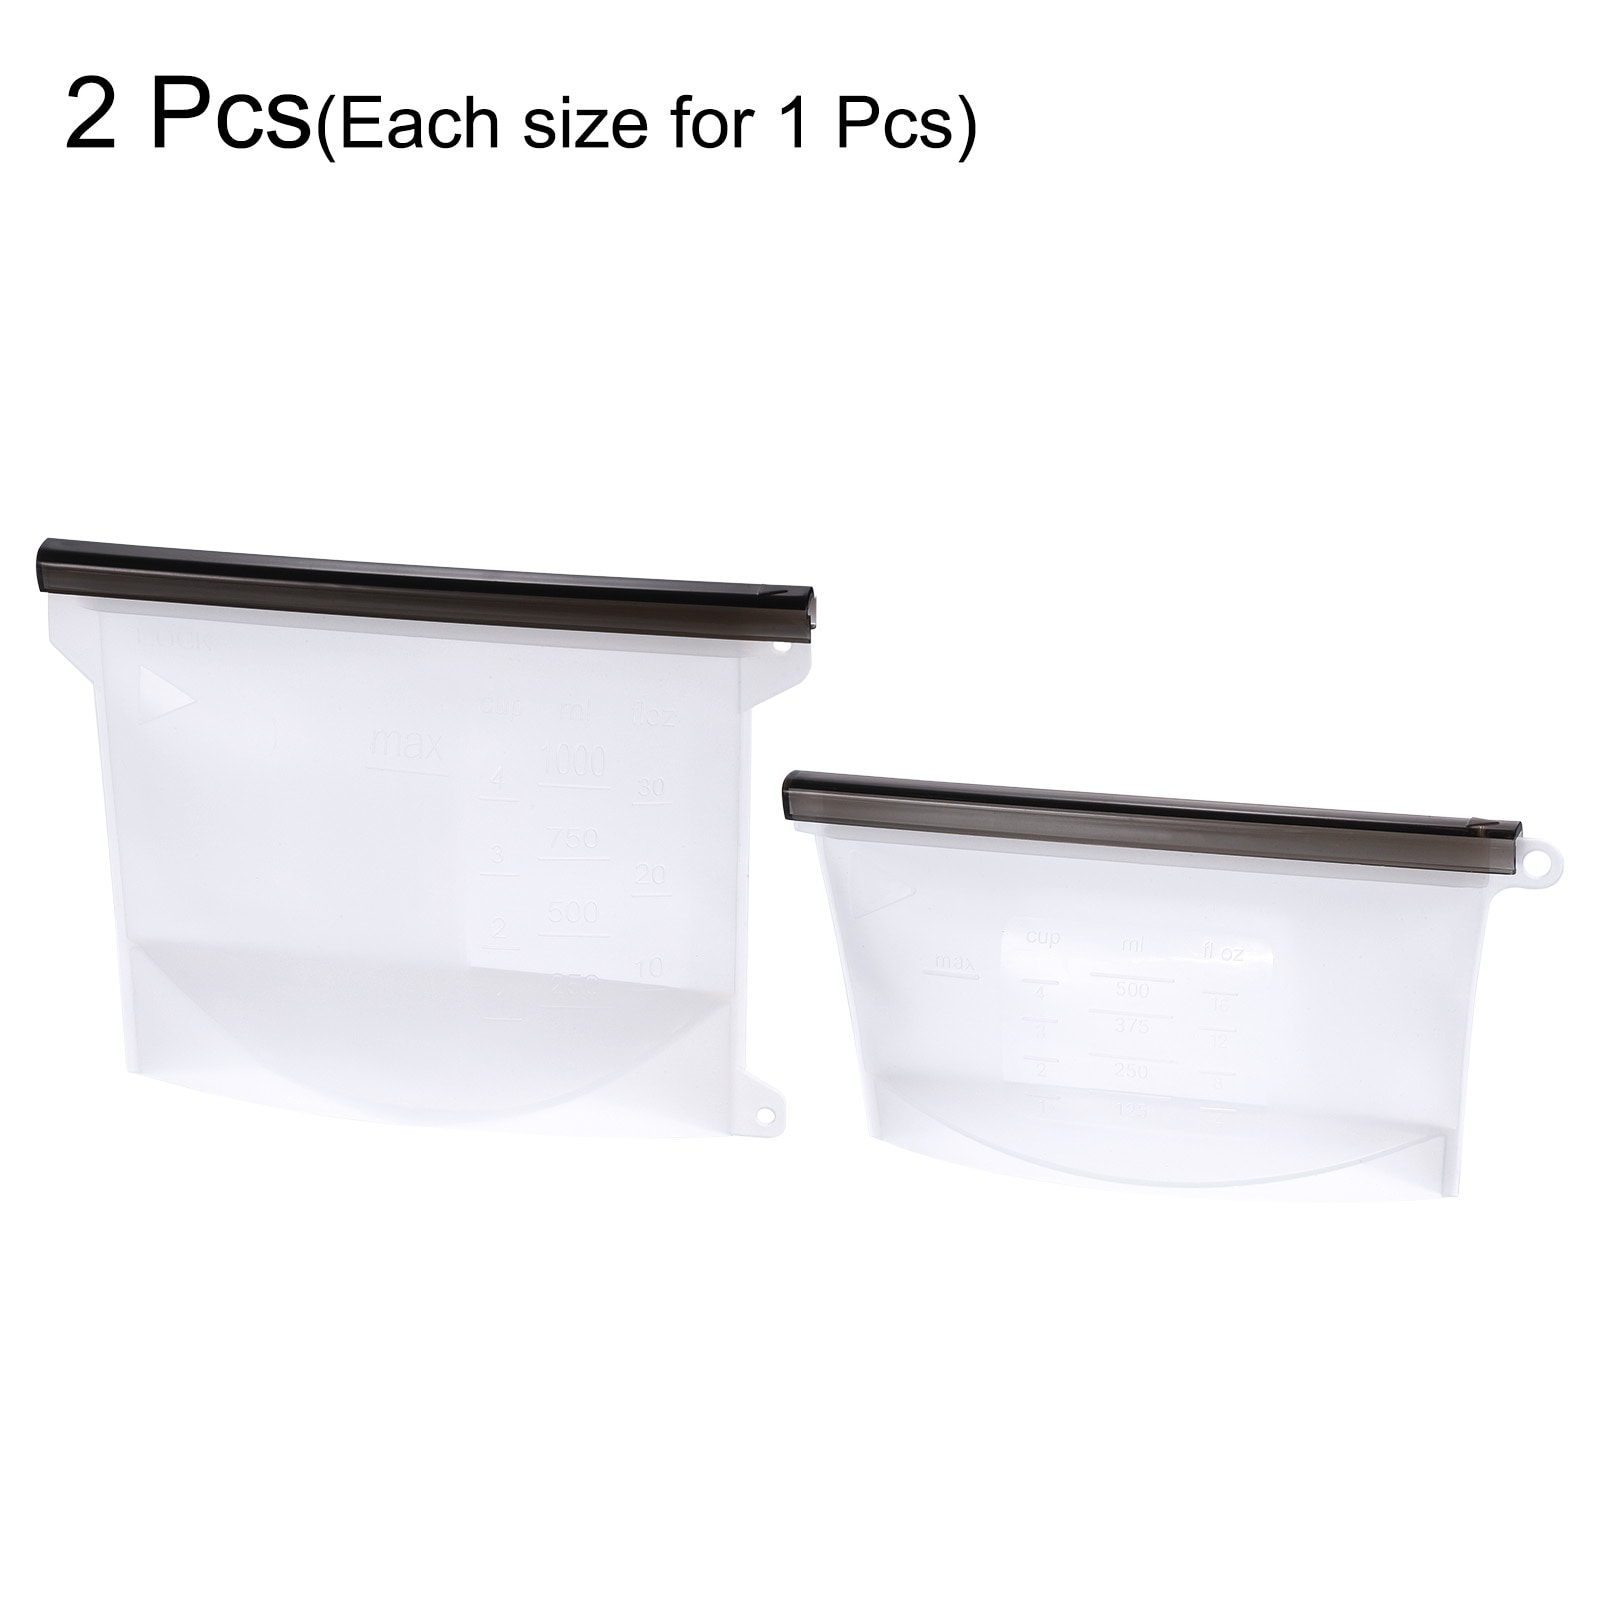 2pcs/pack Reusable Food Storage Bags In Size M/l For Fridge, Vegetables And  Fruits